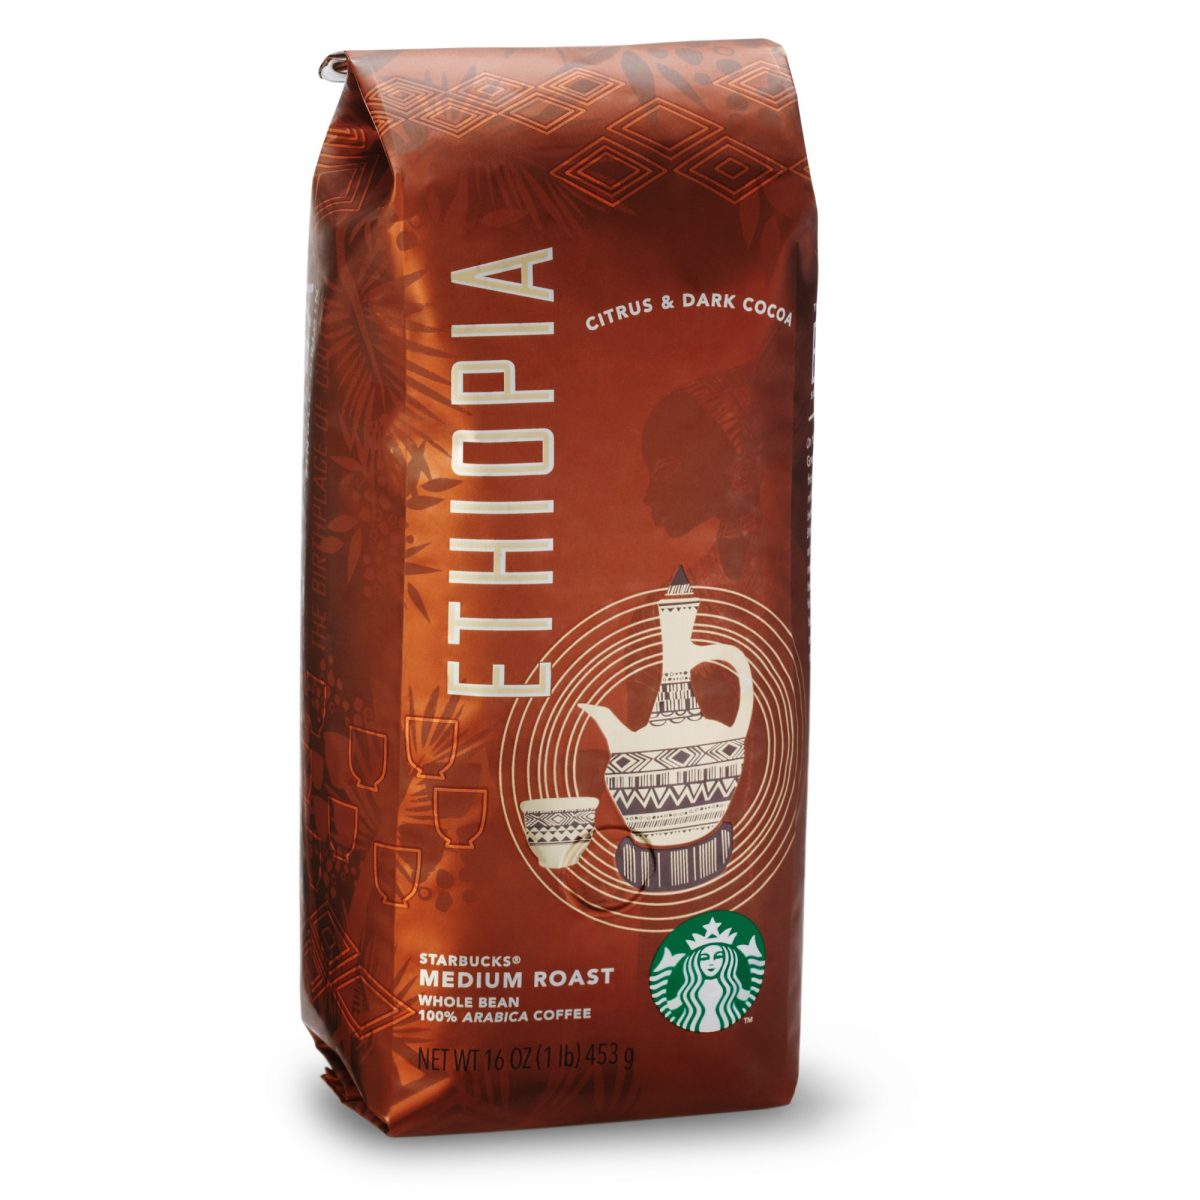 Starbucks Coffee Company today introduces a new single-origin coffee from the birthplace of coffee, Ethiopia.